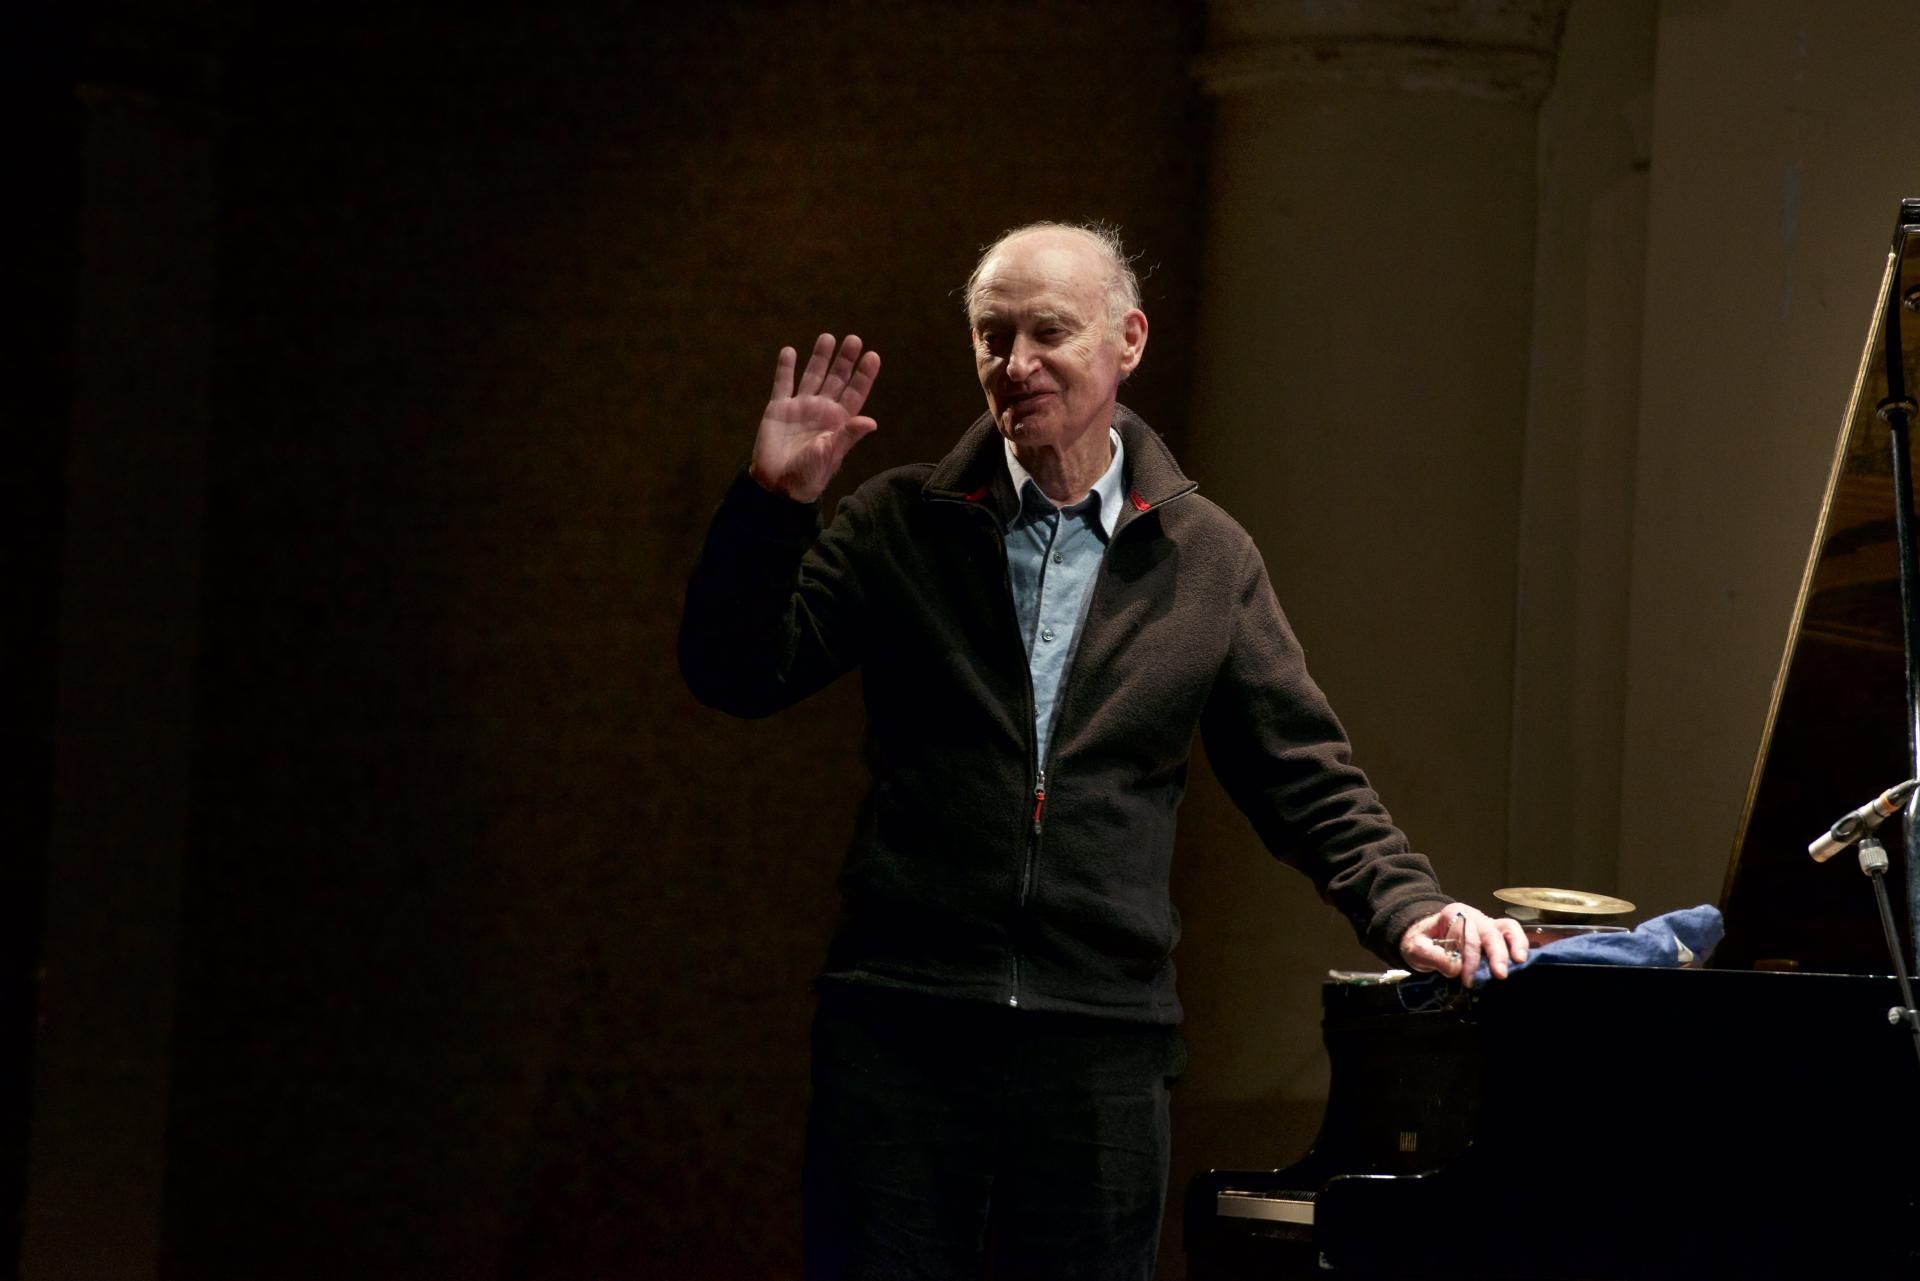 Christian Wolff at AngelicA Festival Bologna 2022 by Massimo Golfieri